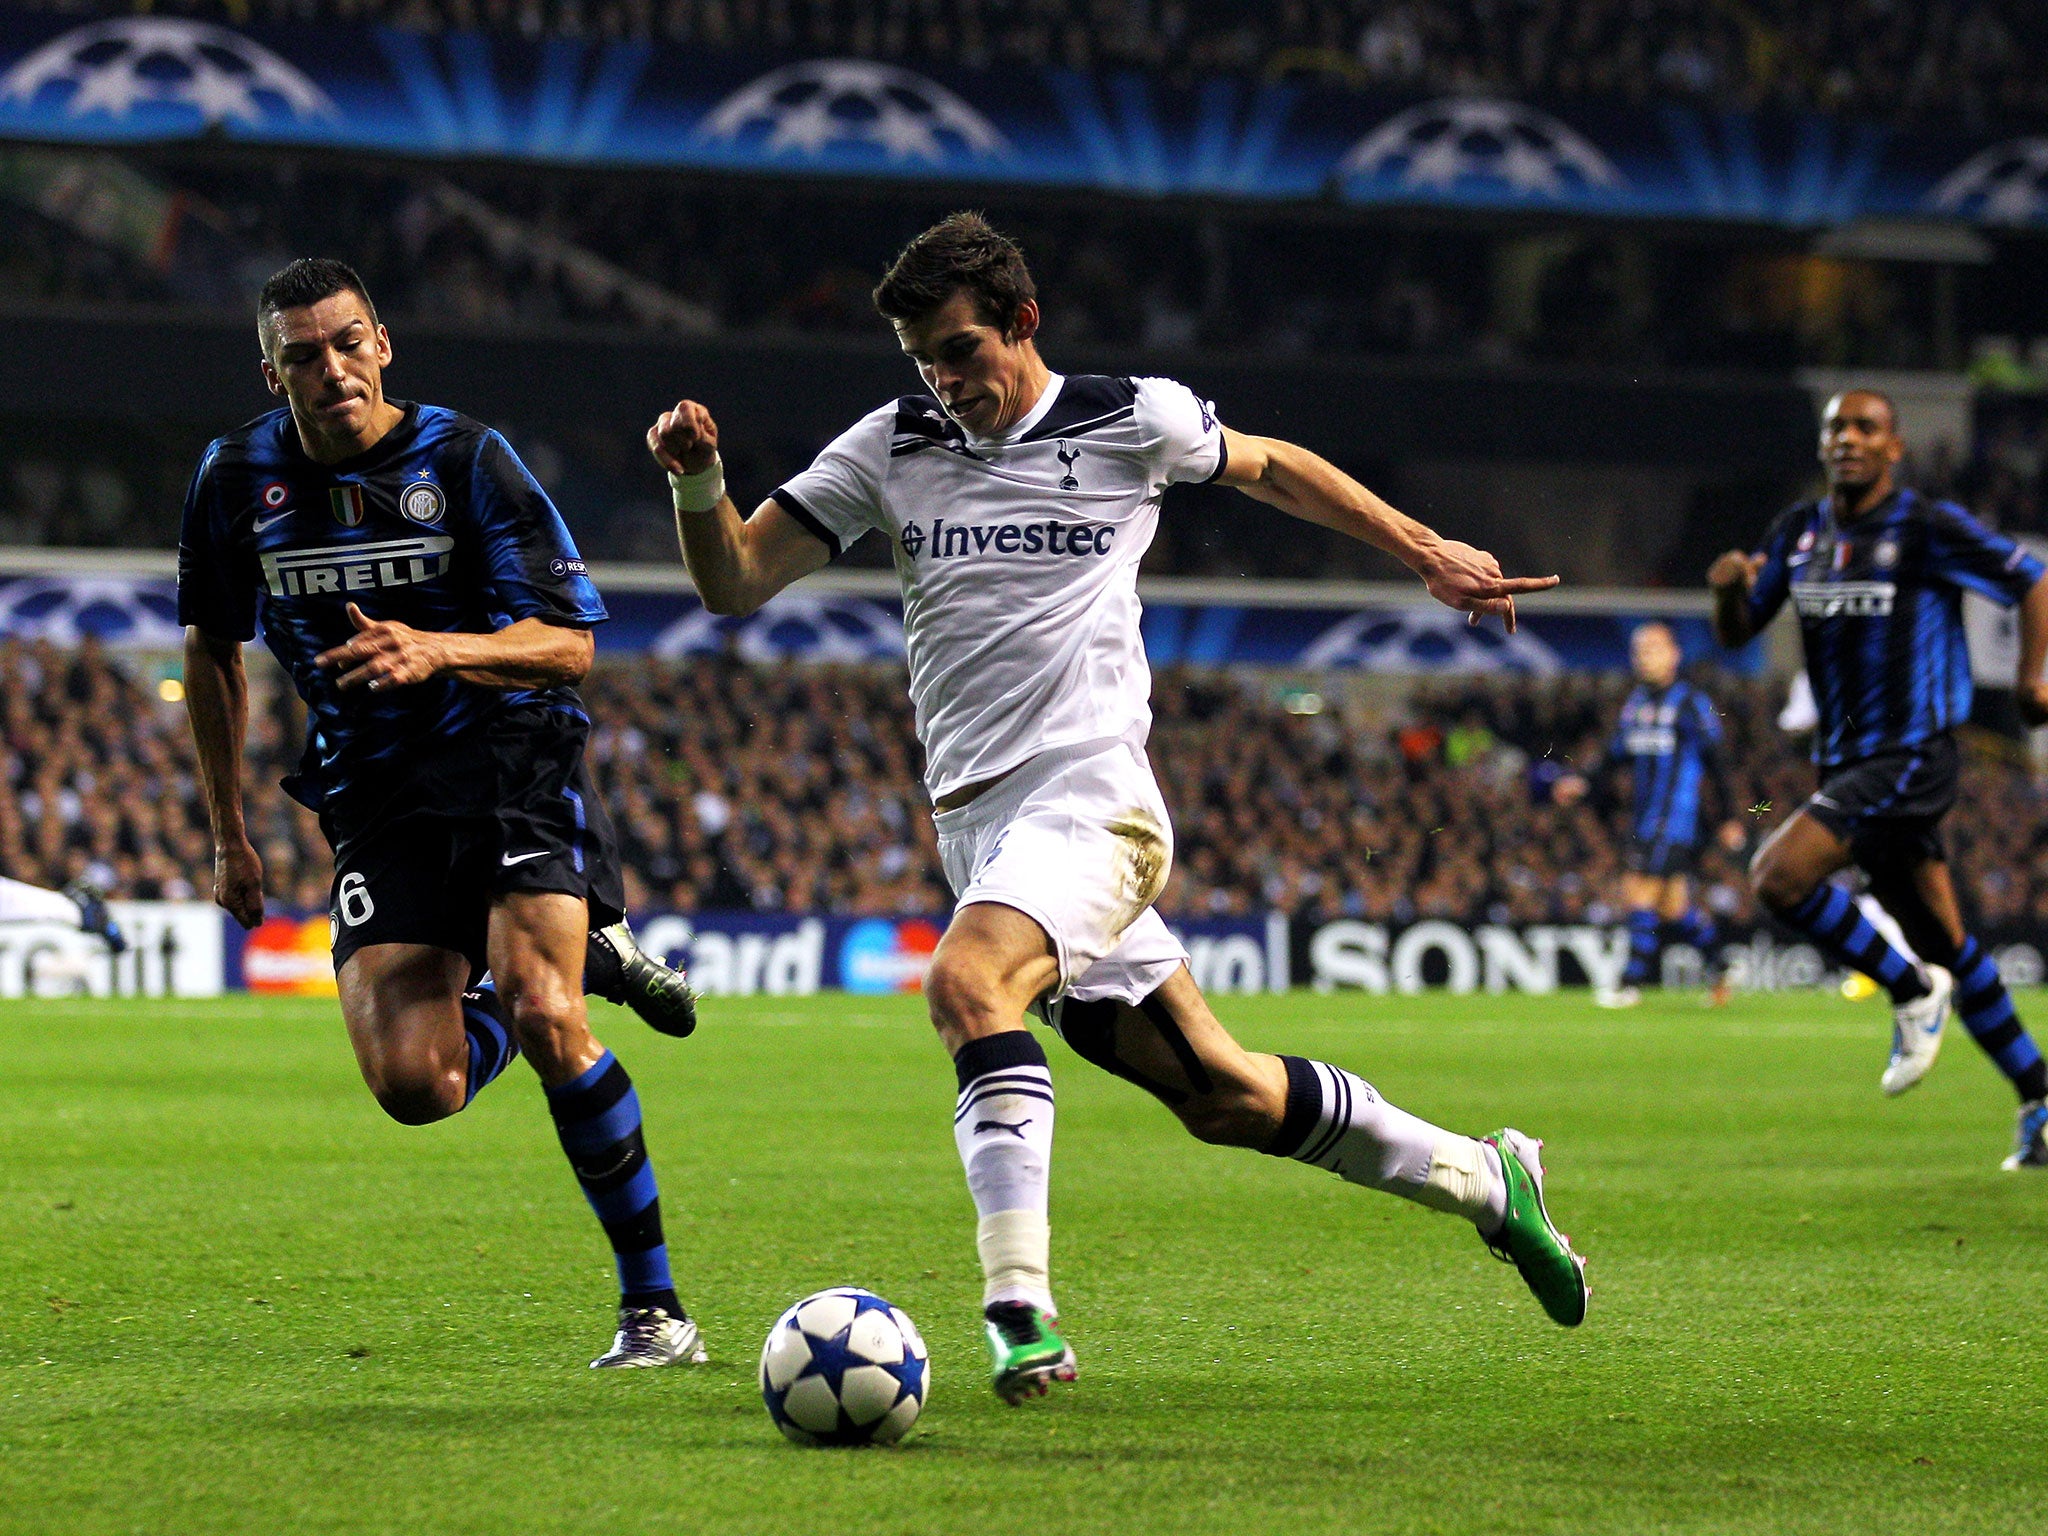 Gareth Bale exploded onto the European stage after his stellar performance against Inter Milan in the Champions League